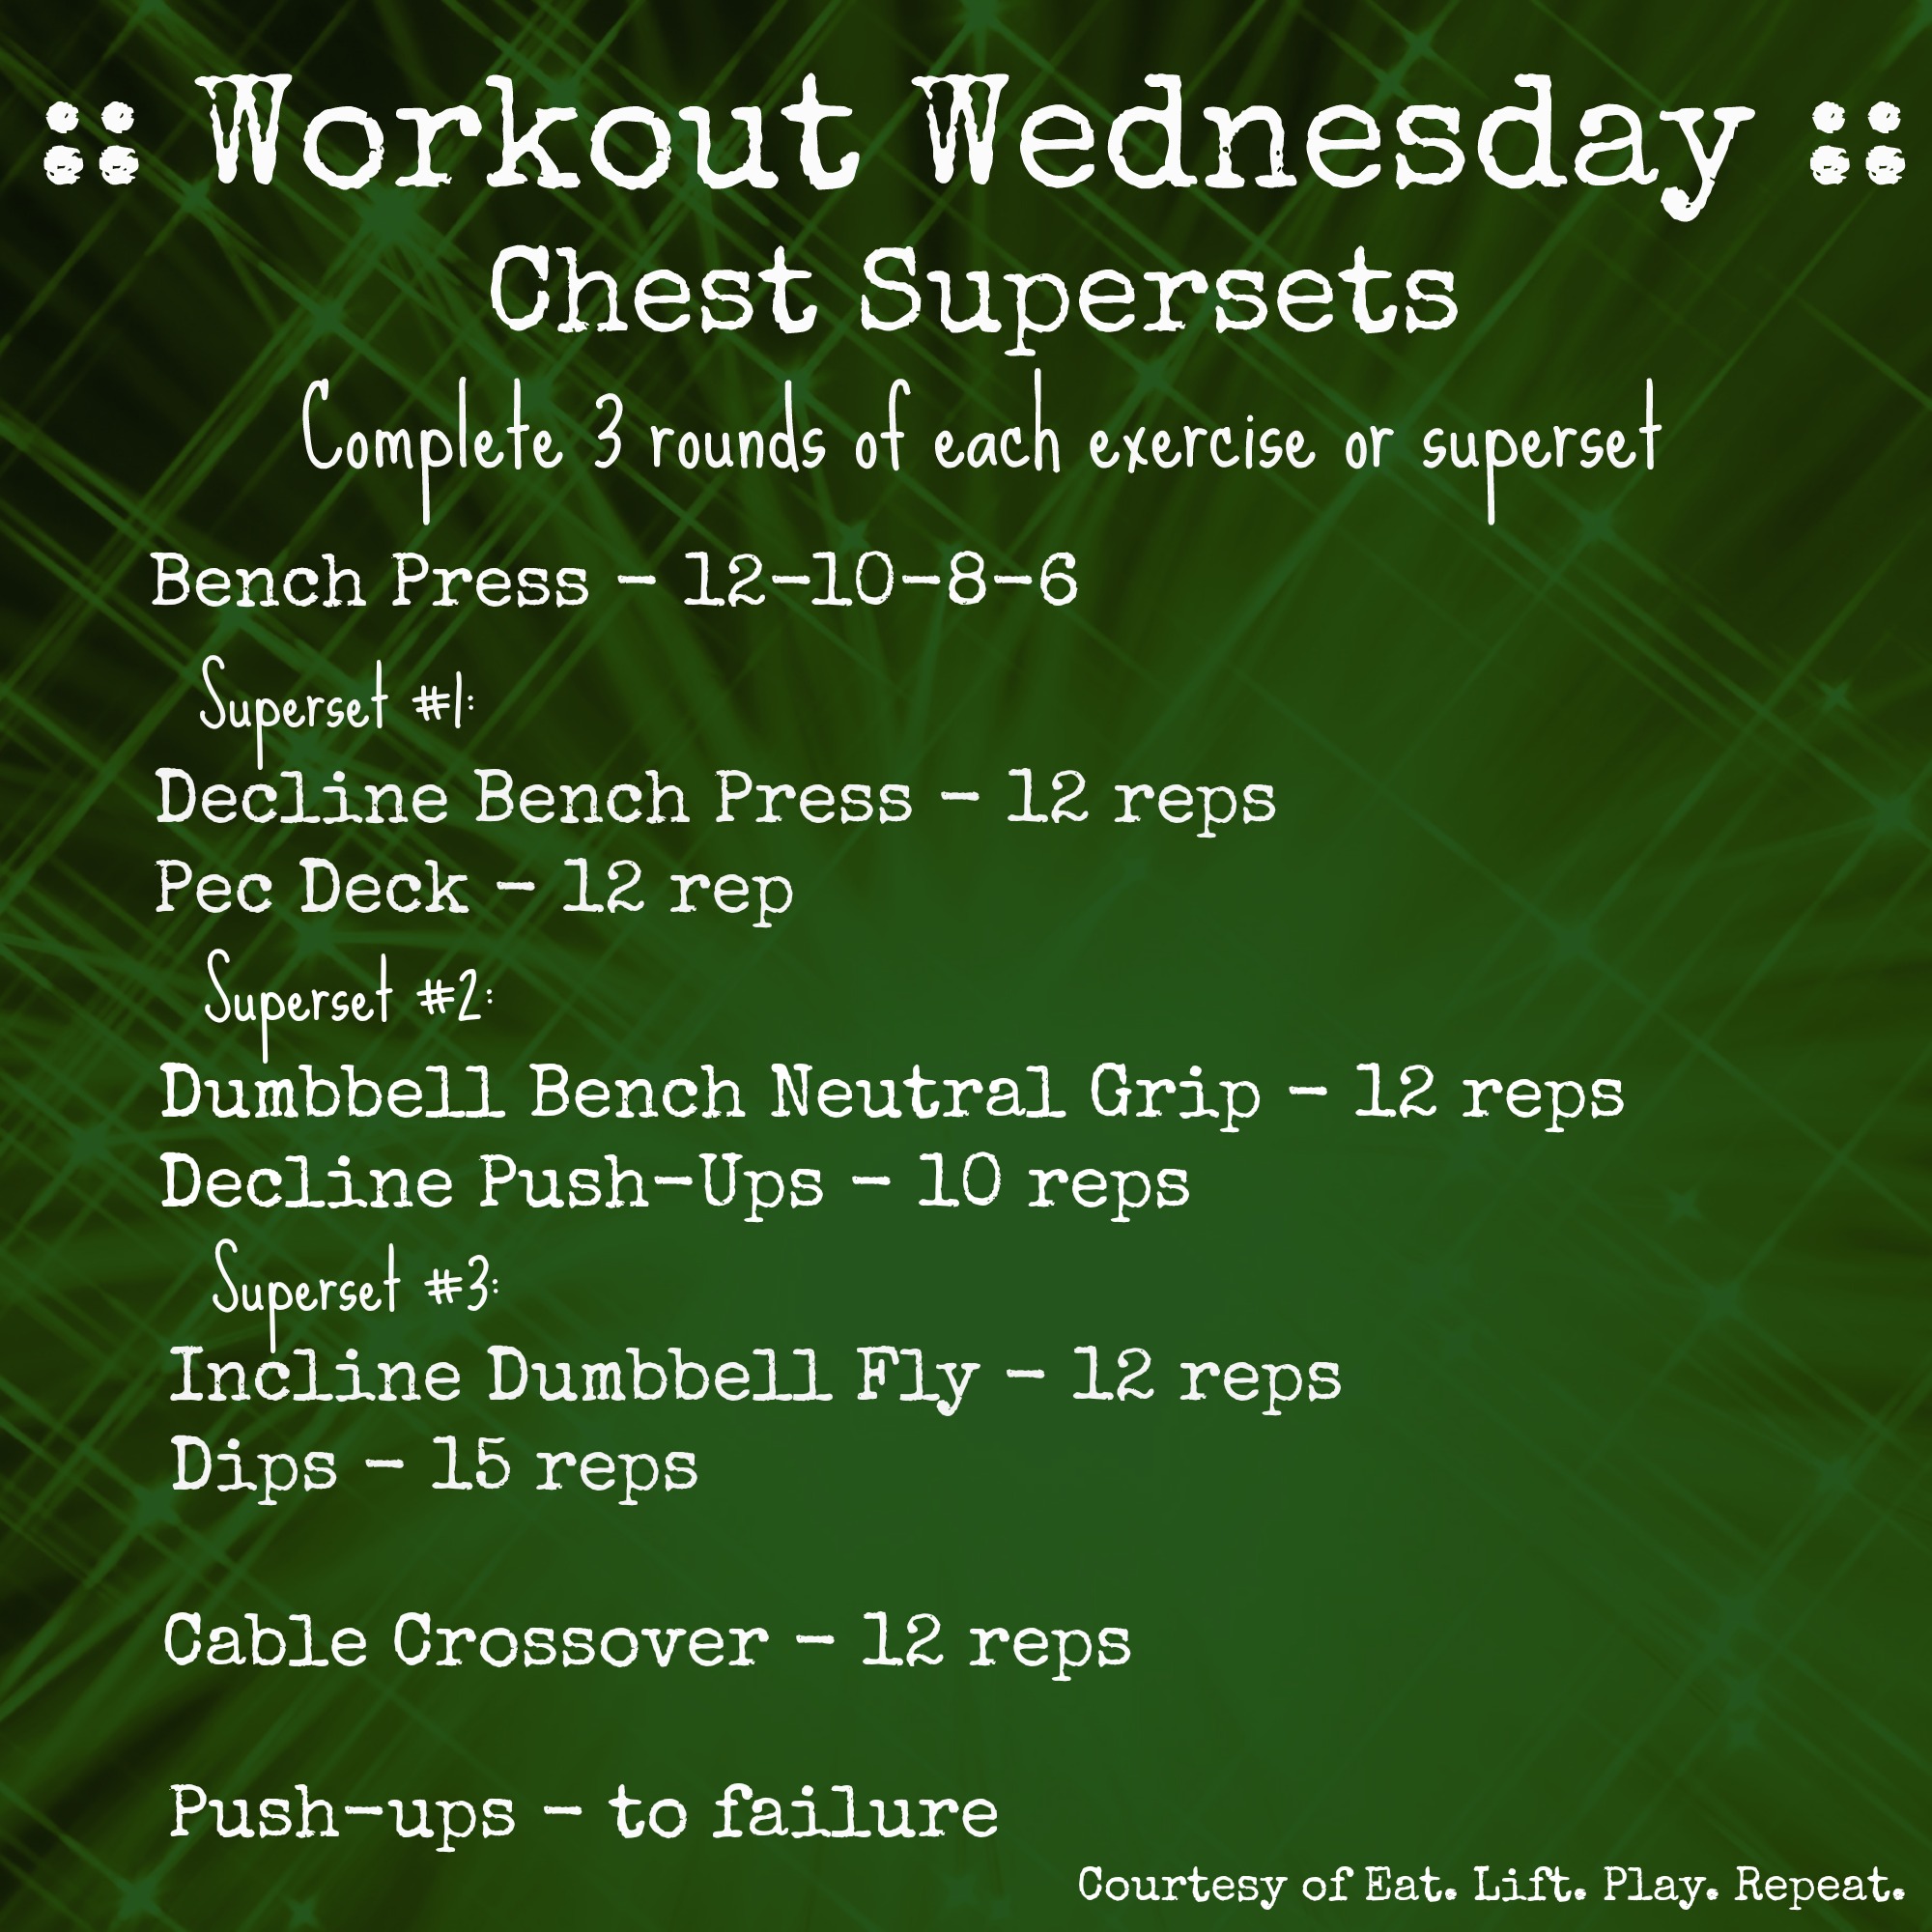 Chest Supersets - Eat. Lift. Play. Repeat.